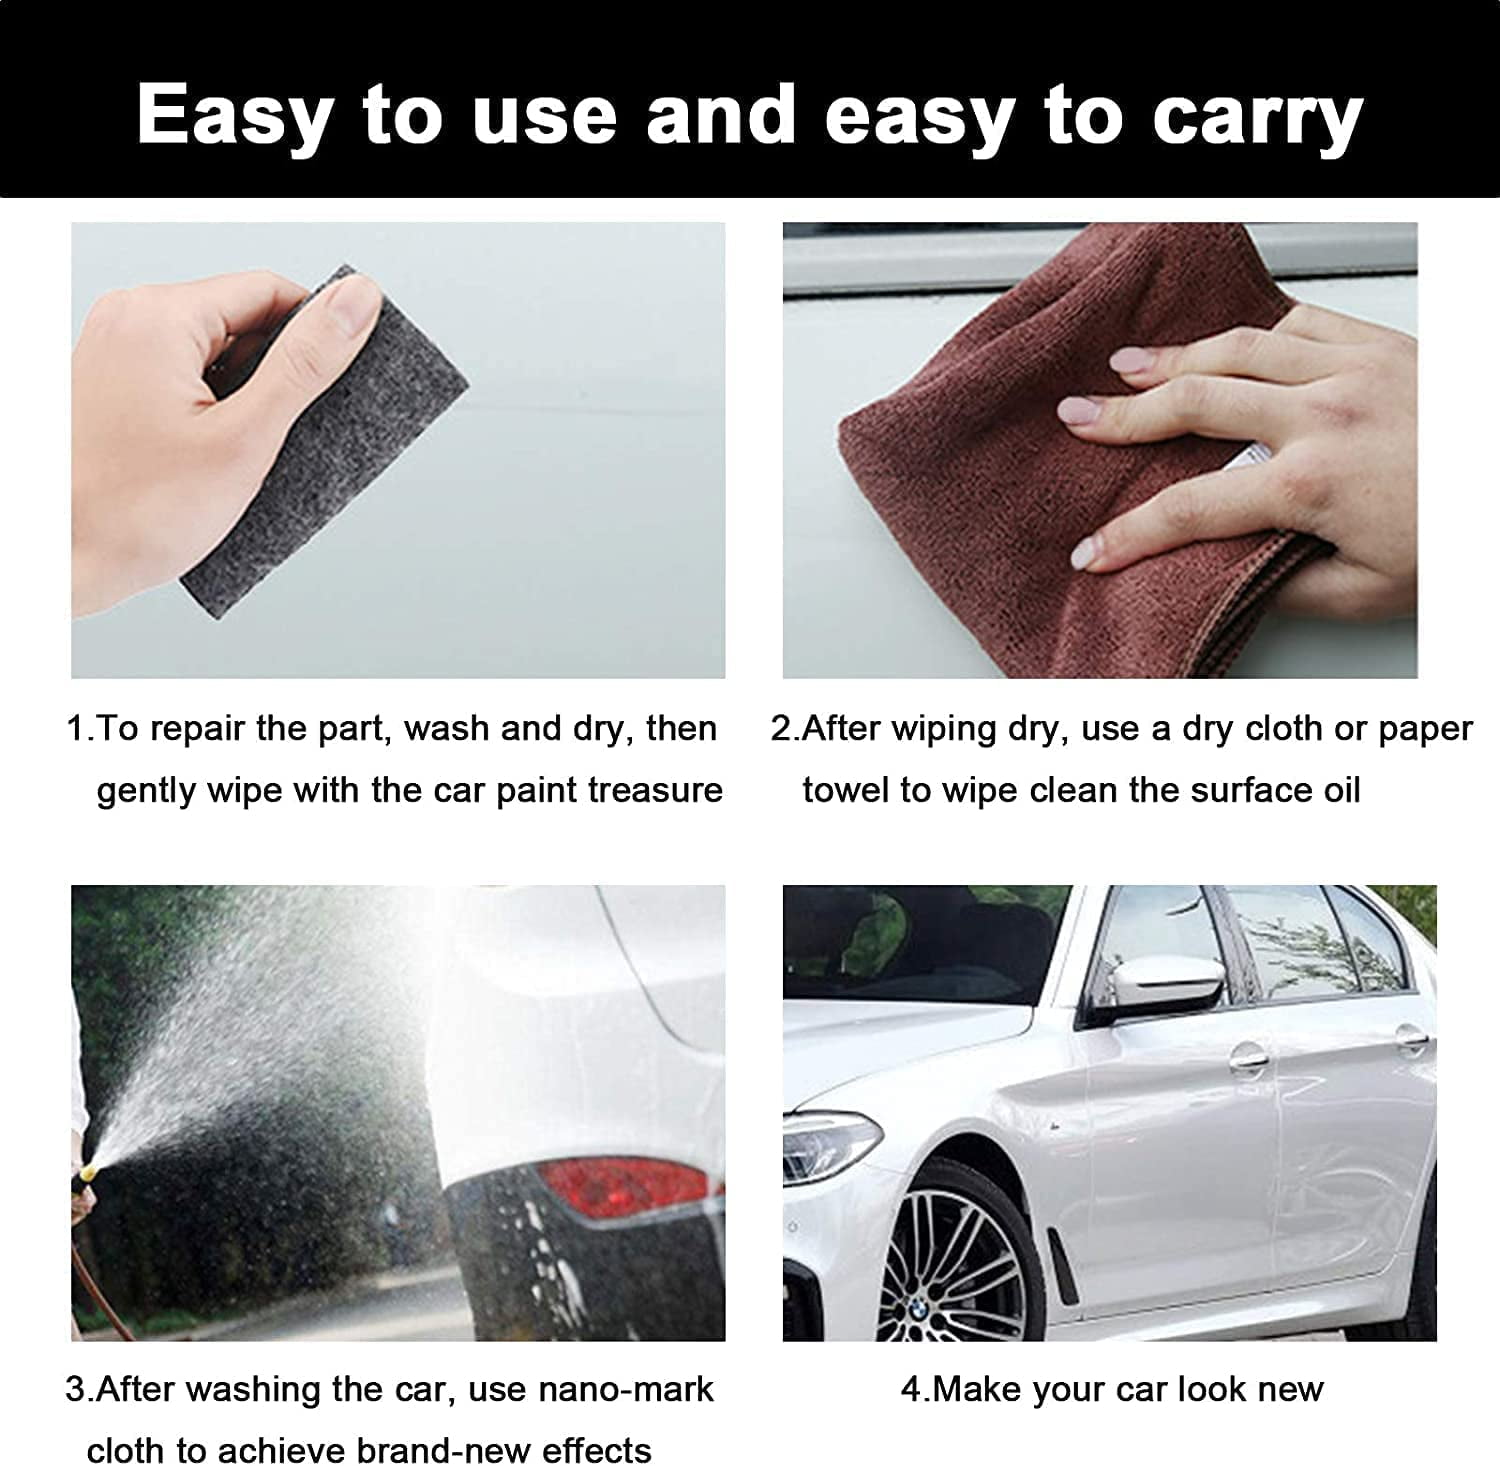 Nano Magic Cloth for Car Scratches 2 Pack Nano Cloth Scratch Remover with Repair Fluid Easily Repair Paint Scratches and Water Spots 